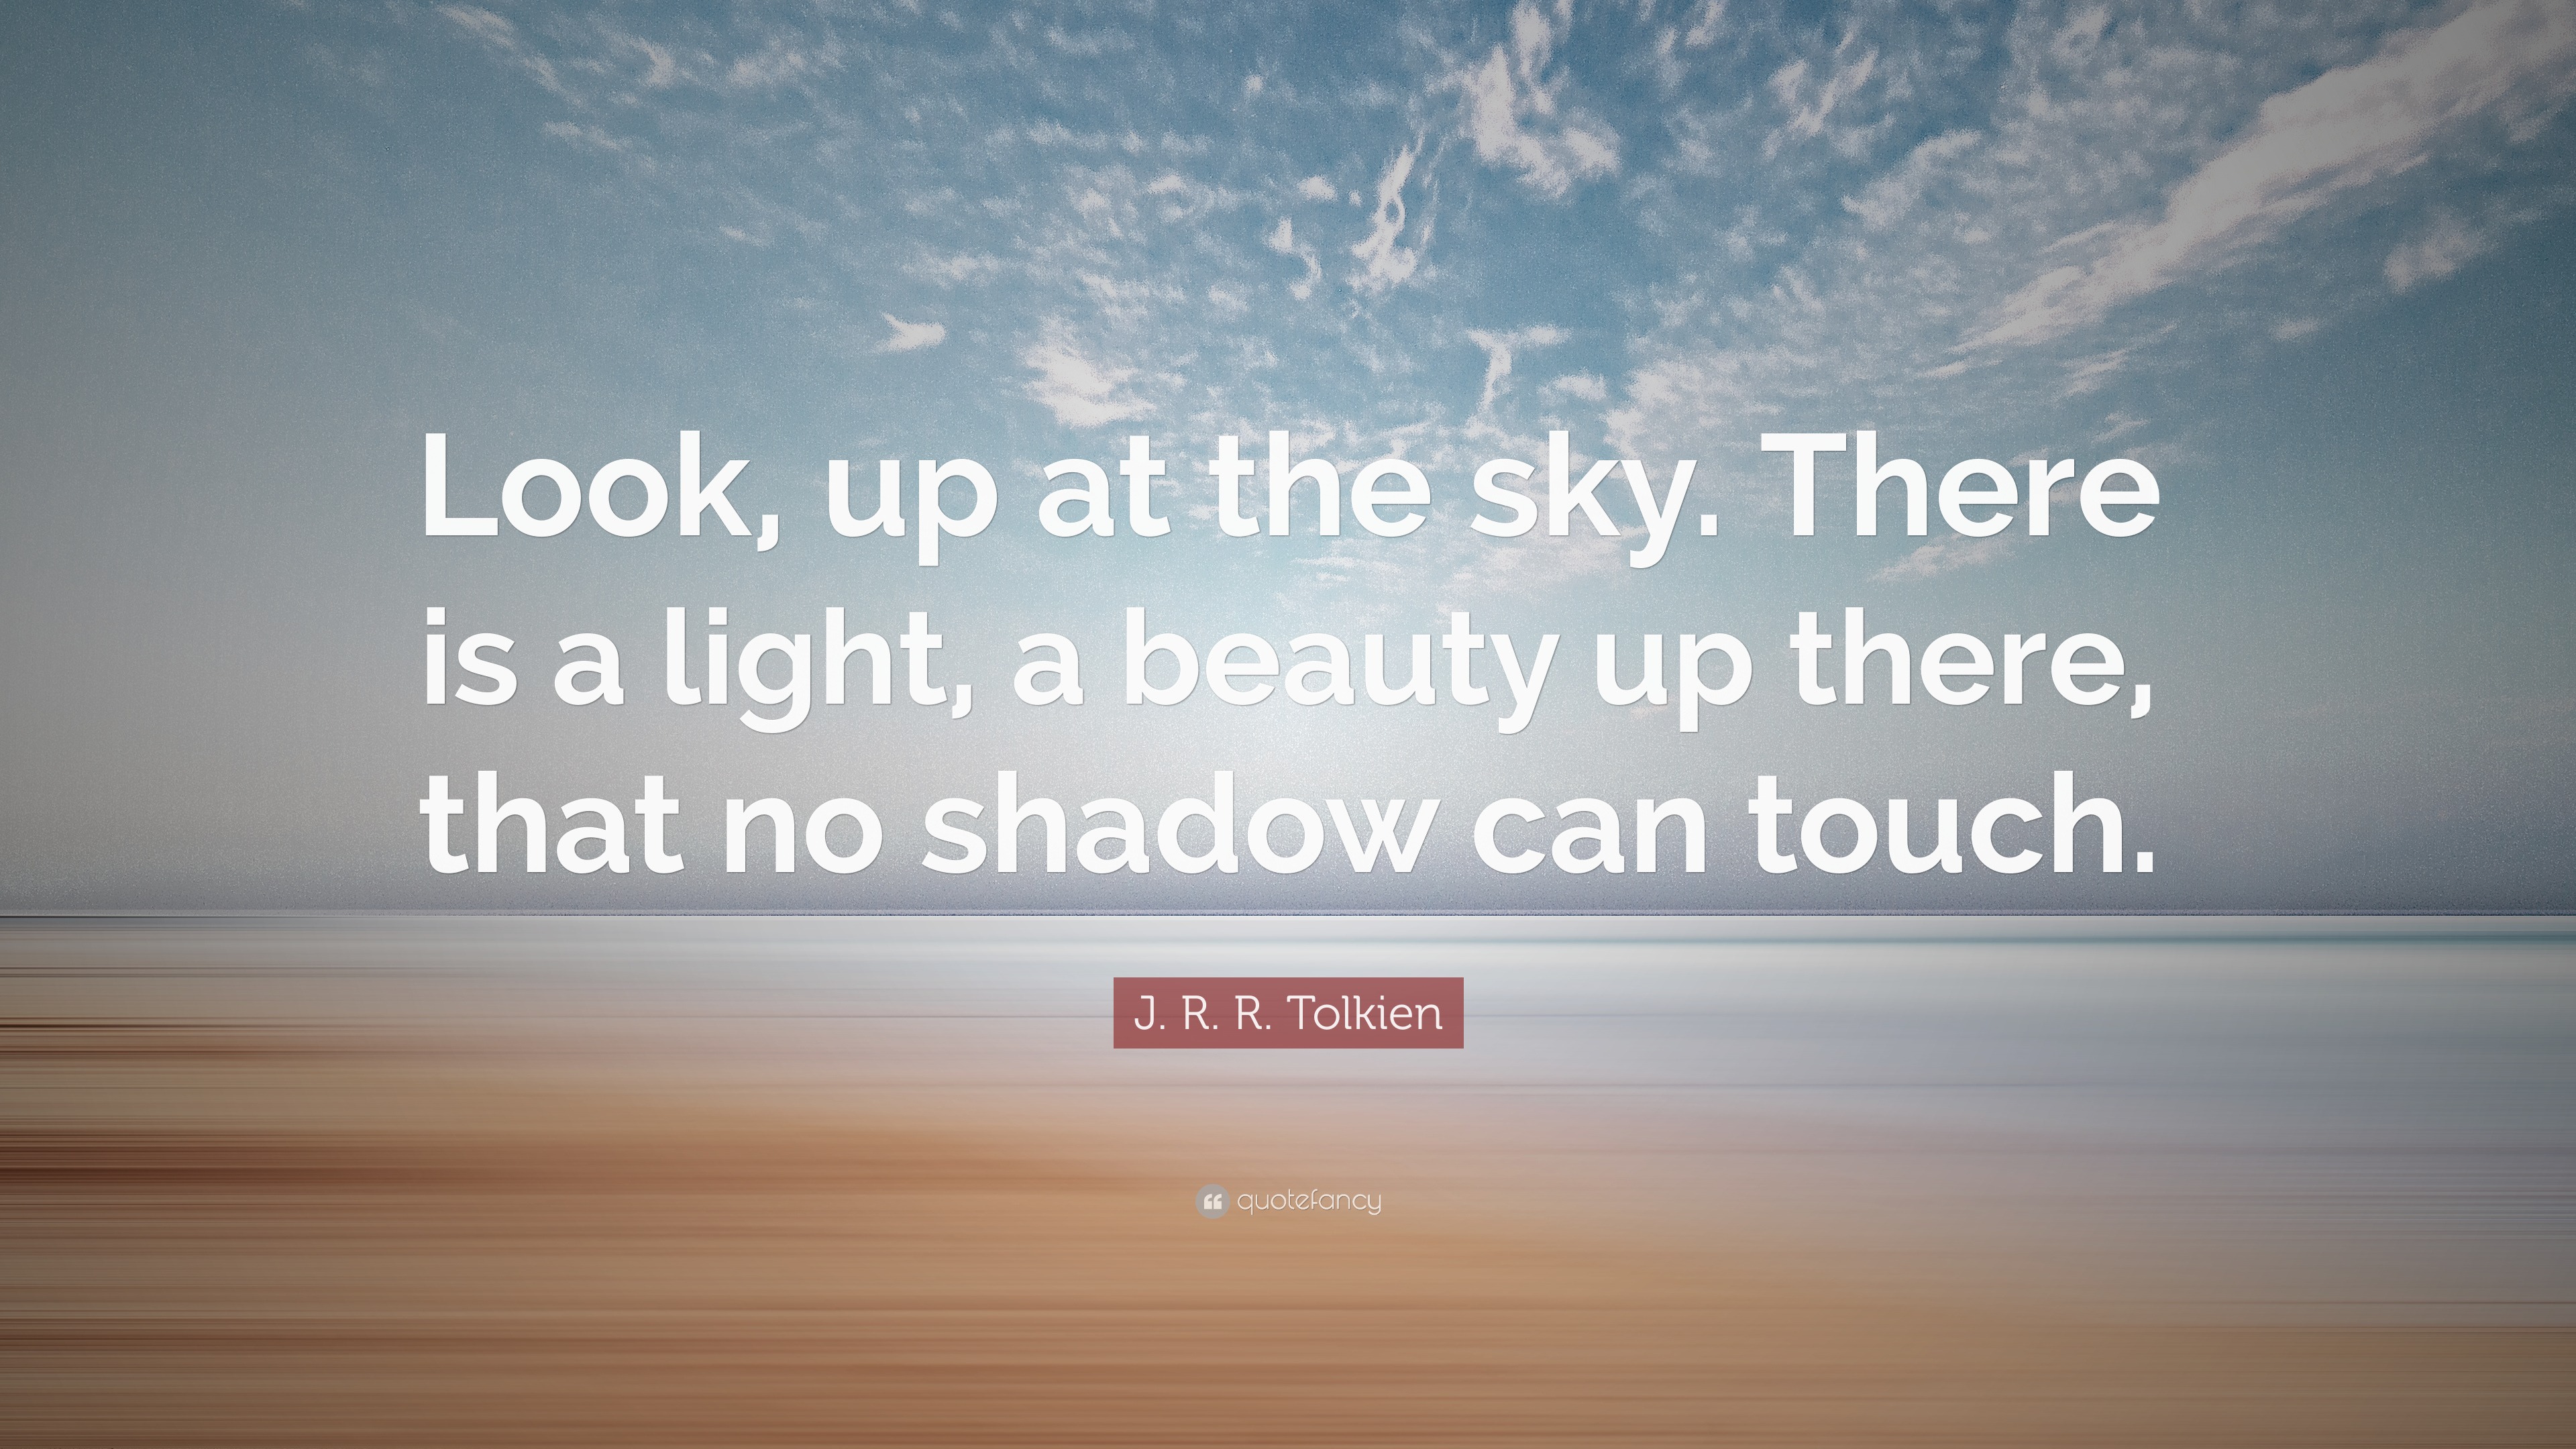 J R R Tolkien Quote Look Up At The Sky There Is A Light A Beauty Up There That No Shadow Can Touch 12 Wallpapers Quotefancy